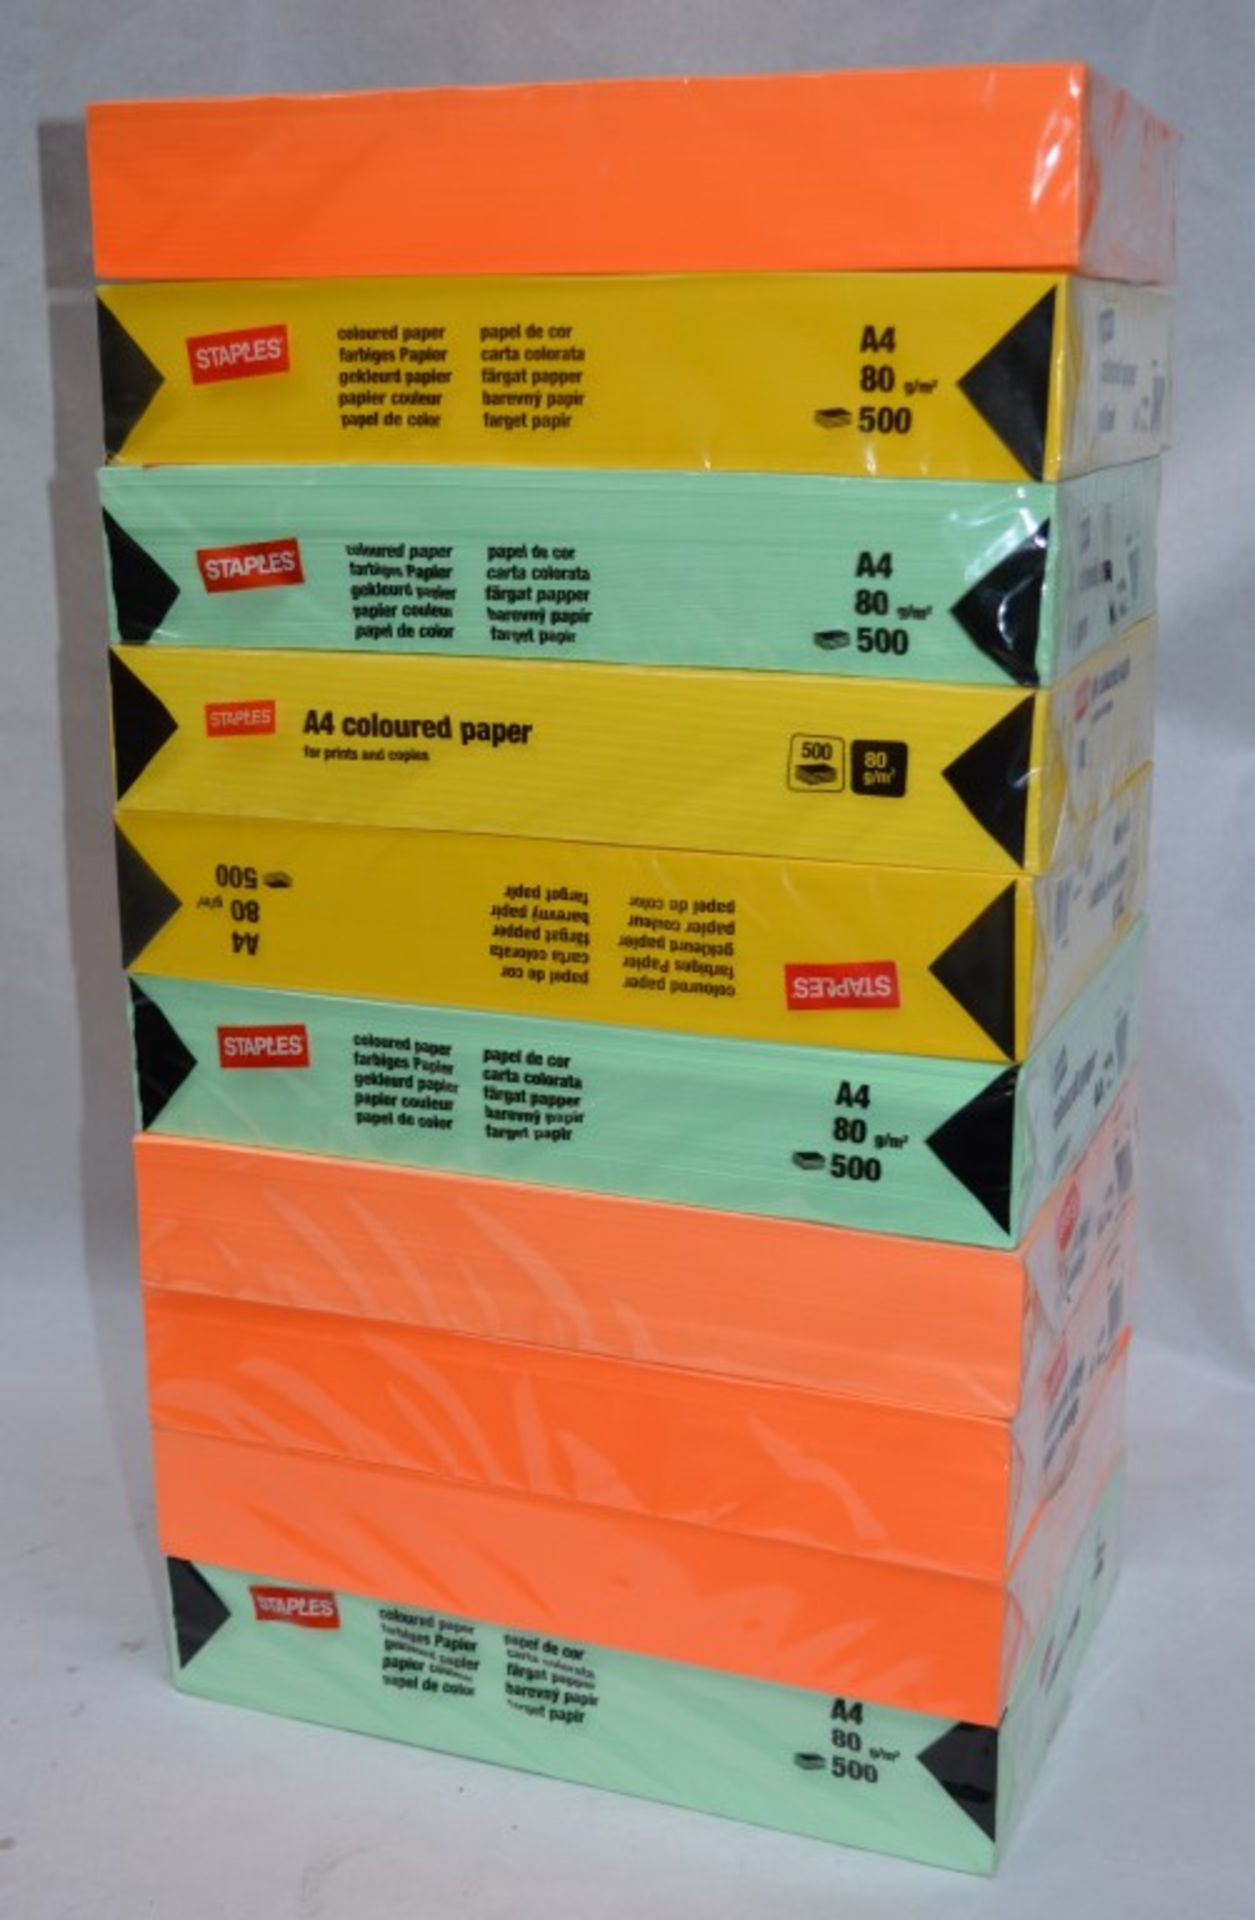 10 x Packs of Staples Coloured A4 Drawing Paper - Includes Orange, Yellow and Green - 500 Pages - Image 2 of 3